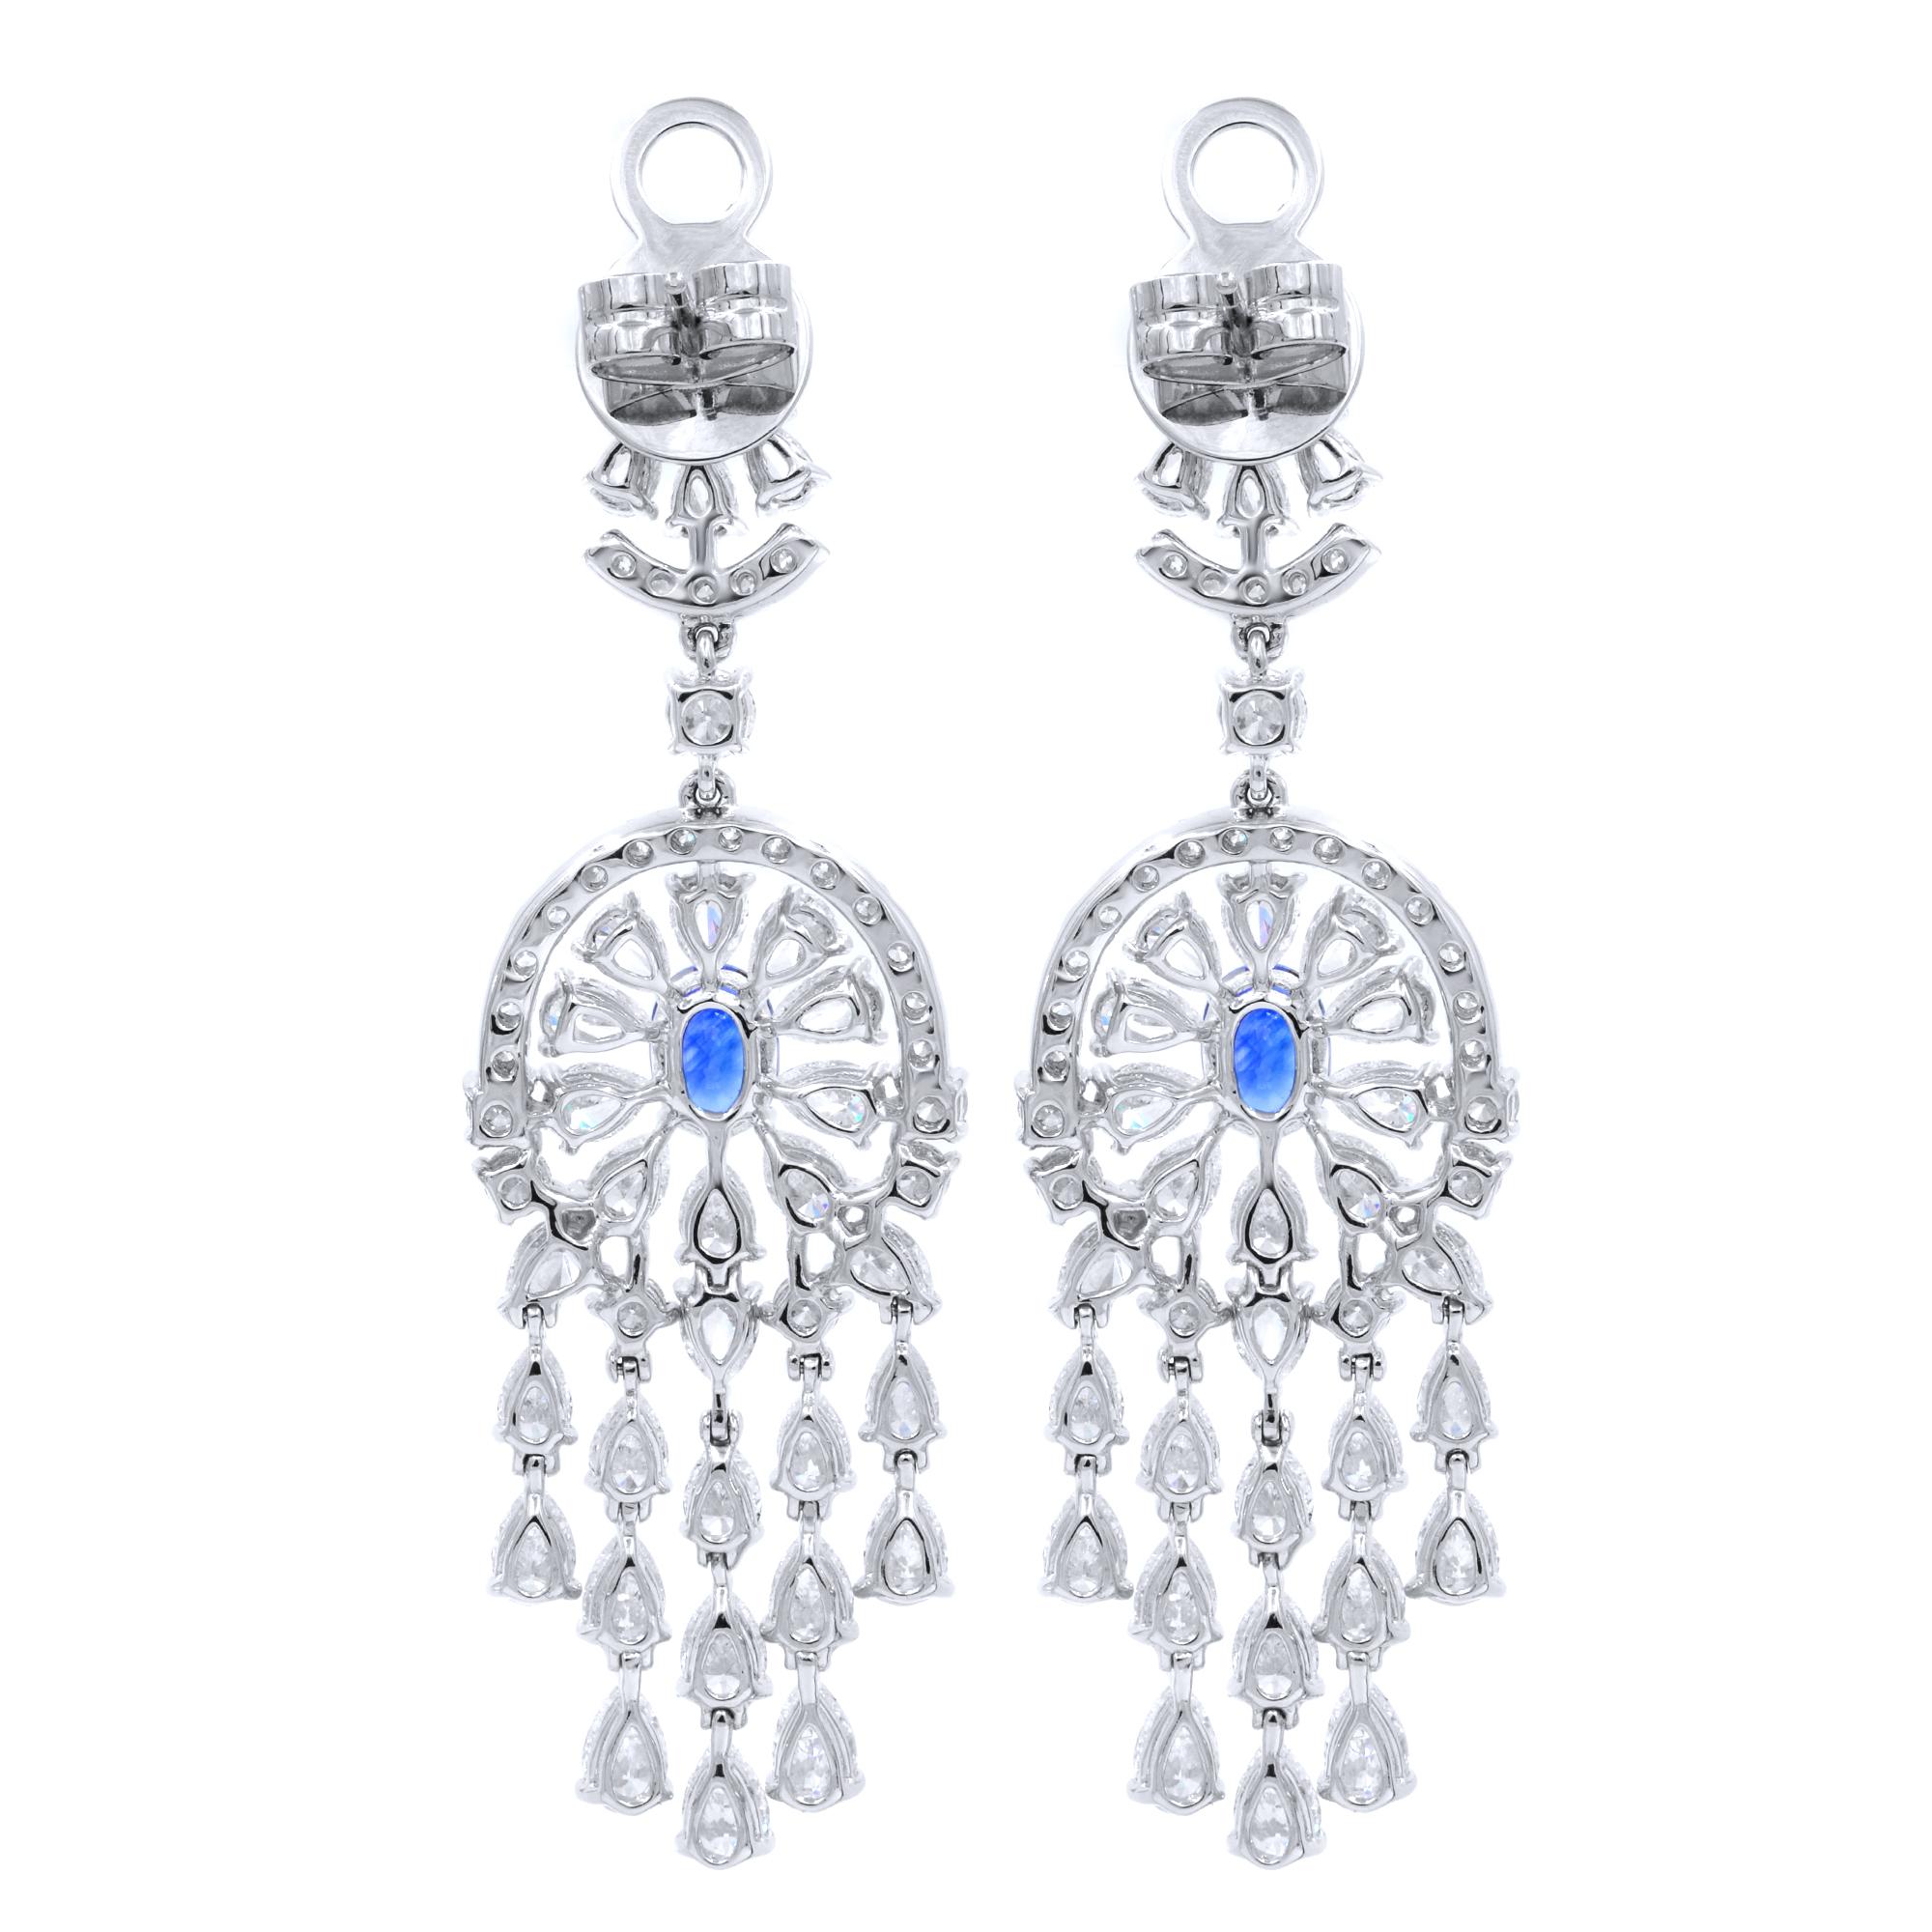 Beautiful diamond earrings make a statement outfit look complete. These classic diamond drop earrings are a lovely combination of 12.80 carat of natural diamonds and  2.05 carat of blue sapphires. The 18k white gold setting is nice compliment to the